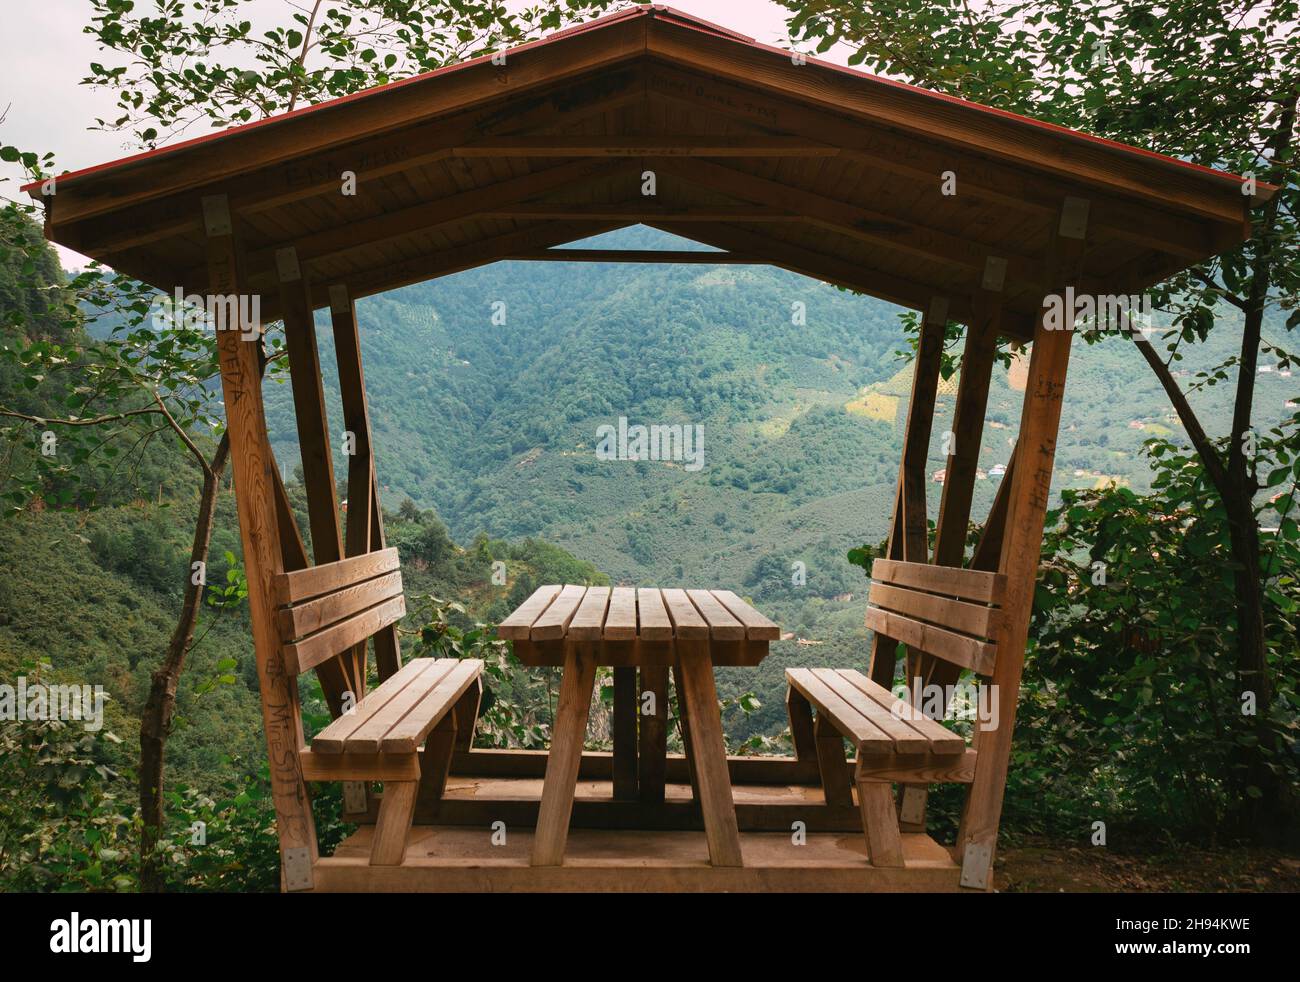 Wooden gazebo, picnic, camping table and benches for Relaxation with view of Forest Stock Photo